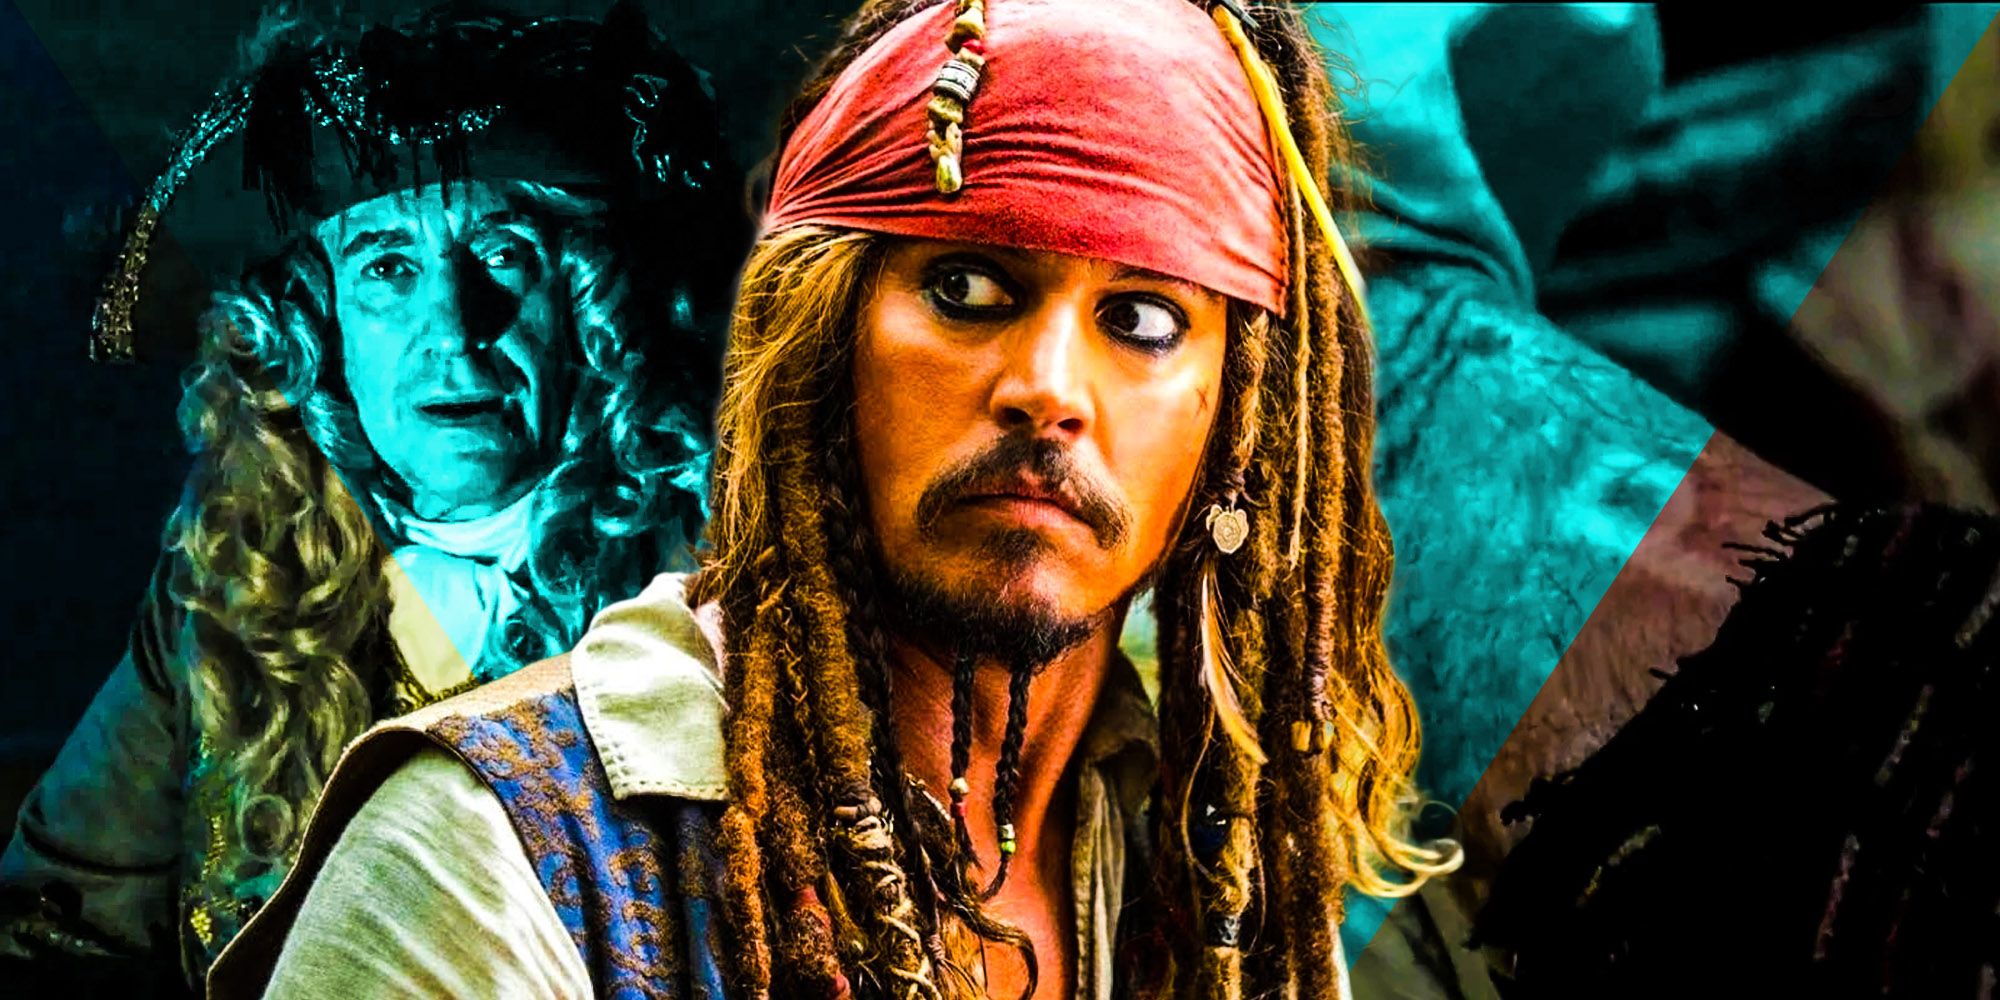 POTC At Worlds End Deleted Scenes Fix The Movies Problems And Mysteries